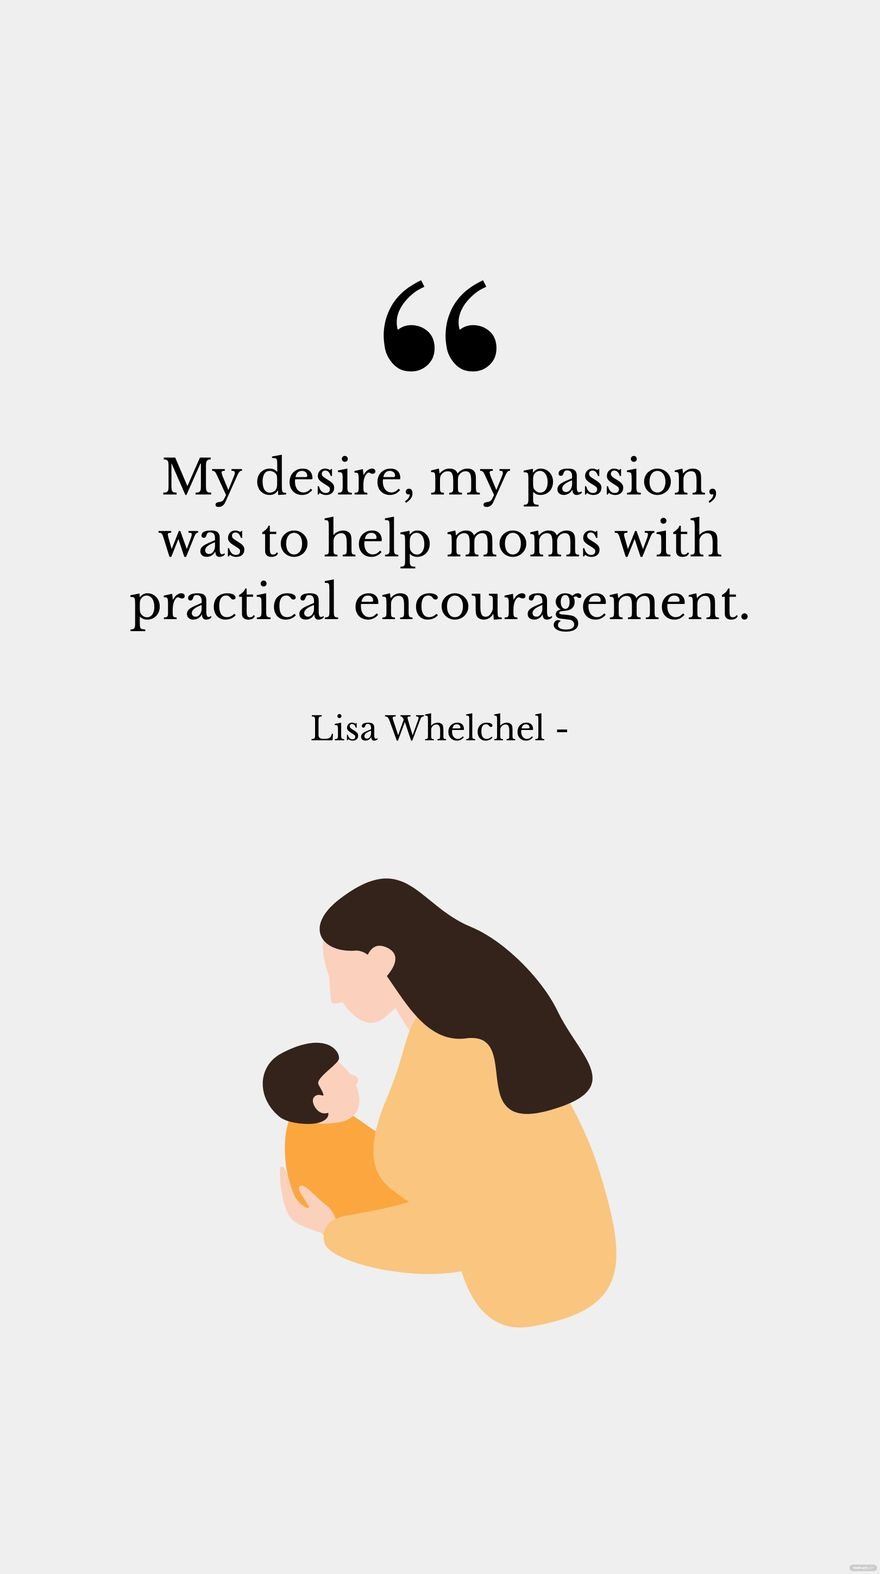 Free Lisa Whelchel - My desire, my passion, was to help moms with practical encouragement. Template